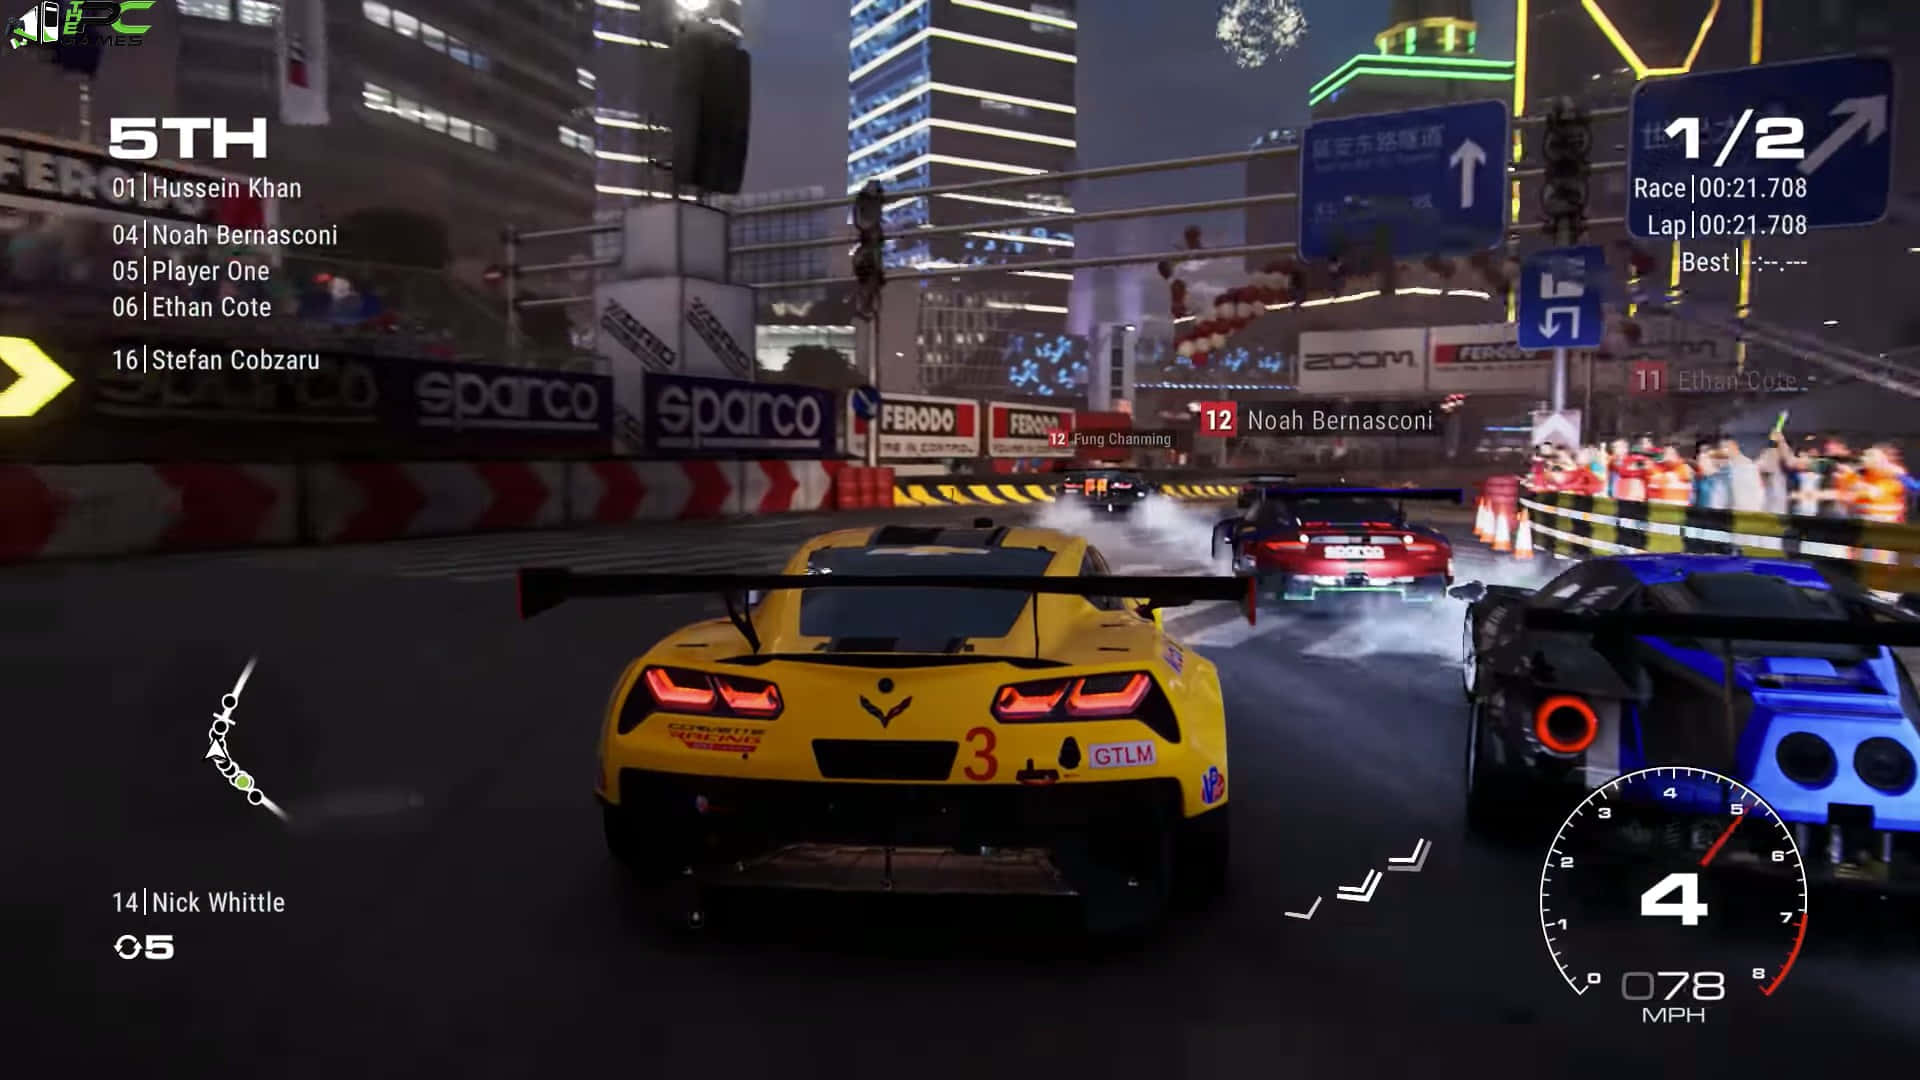 A breathtaking view of the Grid 2 racing game featuring an intense high-speed chase on a winding track.